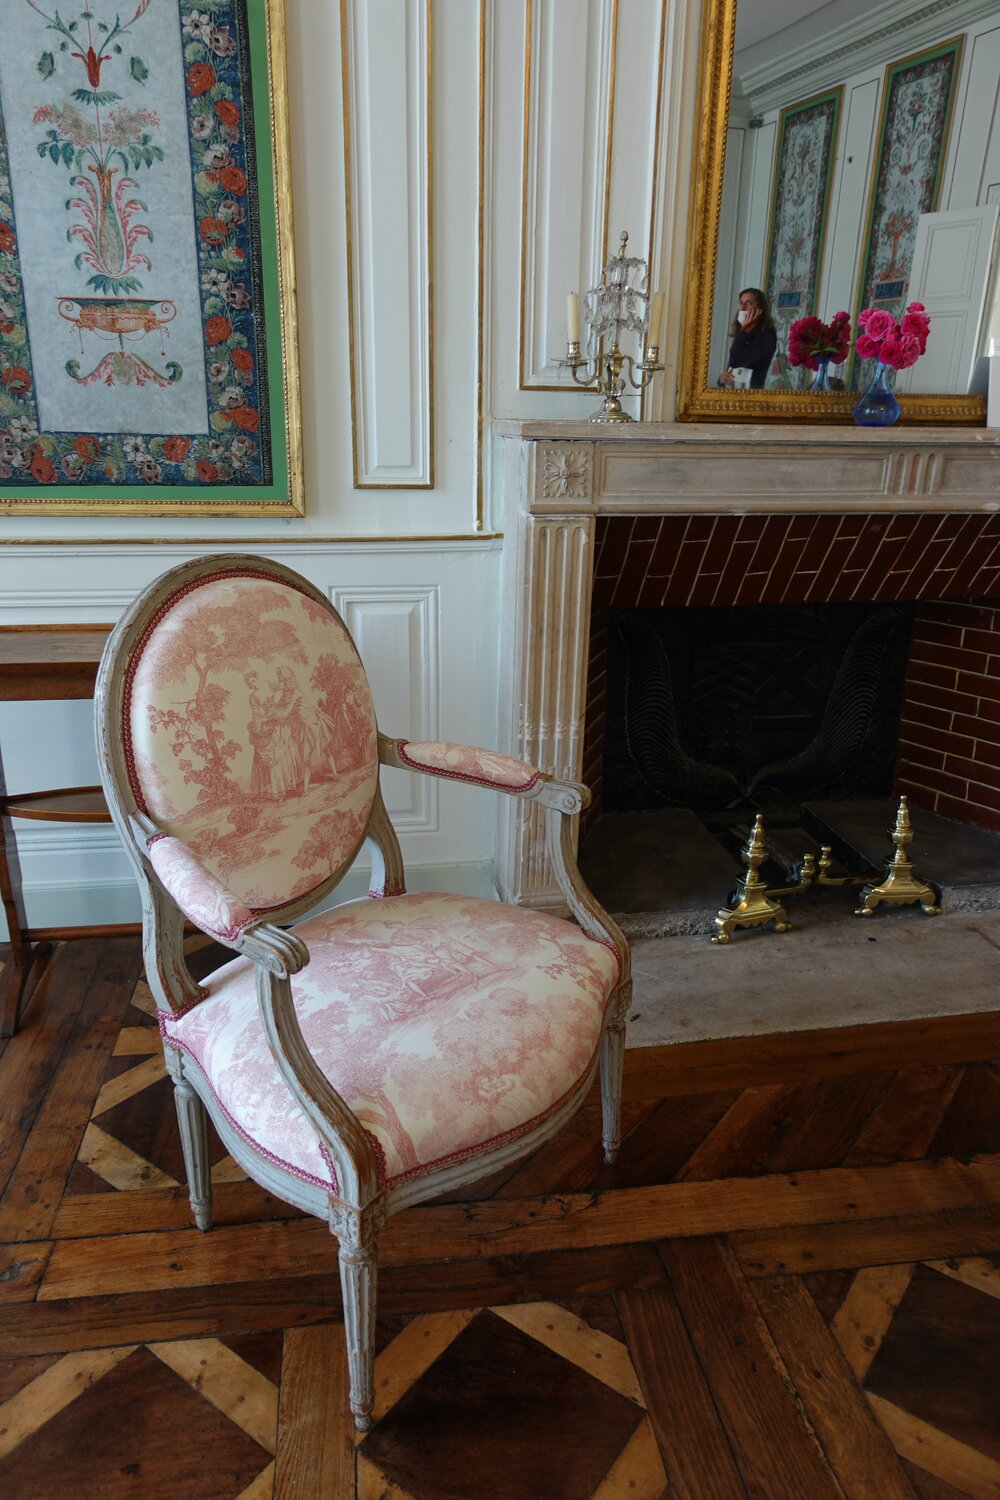 My favorite chair! Drawing Room of Chateau Chavaniac at Chavaniac-Lafayette, Auvergne, France